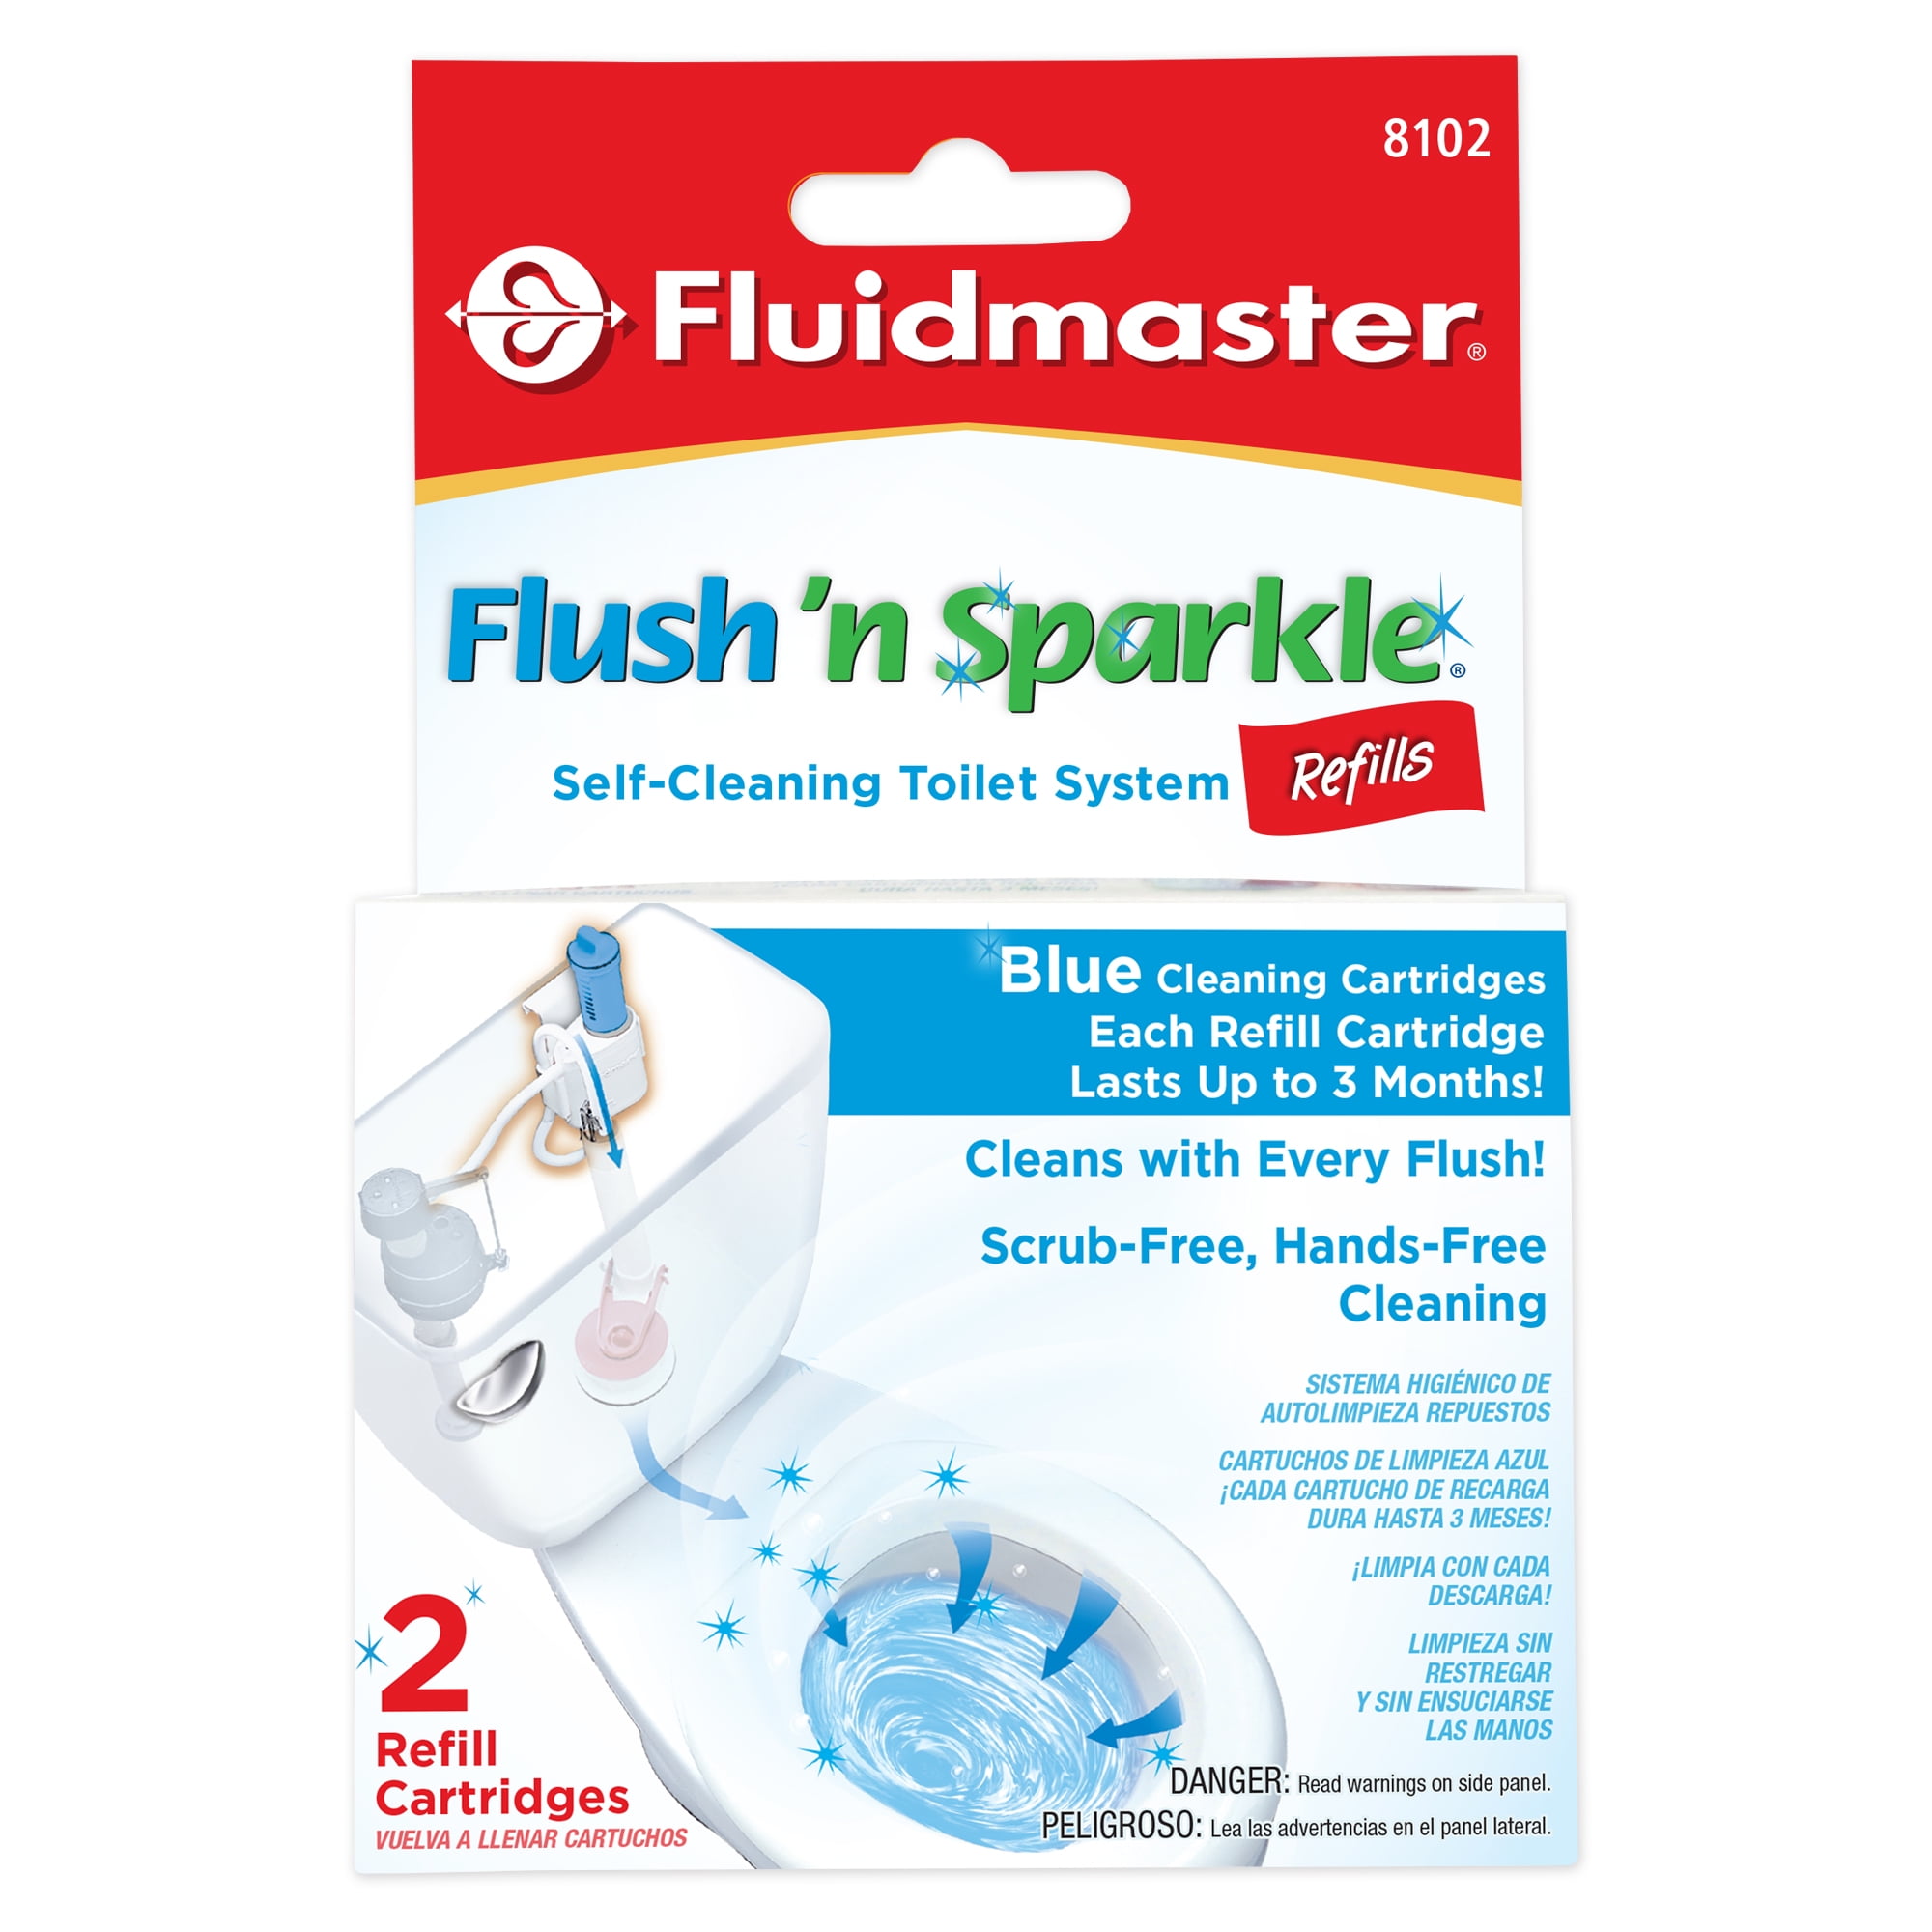 Automatic Toilet Cleaner, Flush 'n Sparkle Toilet Cleaner